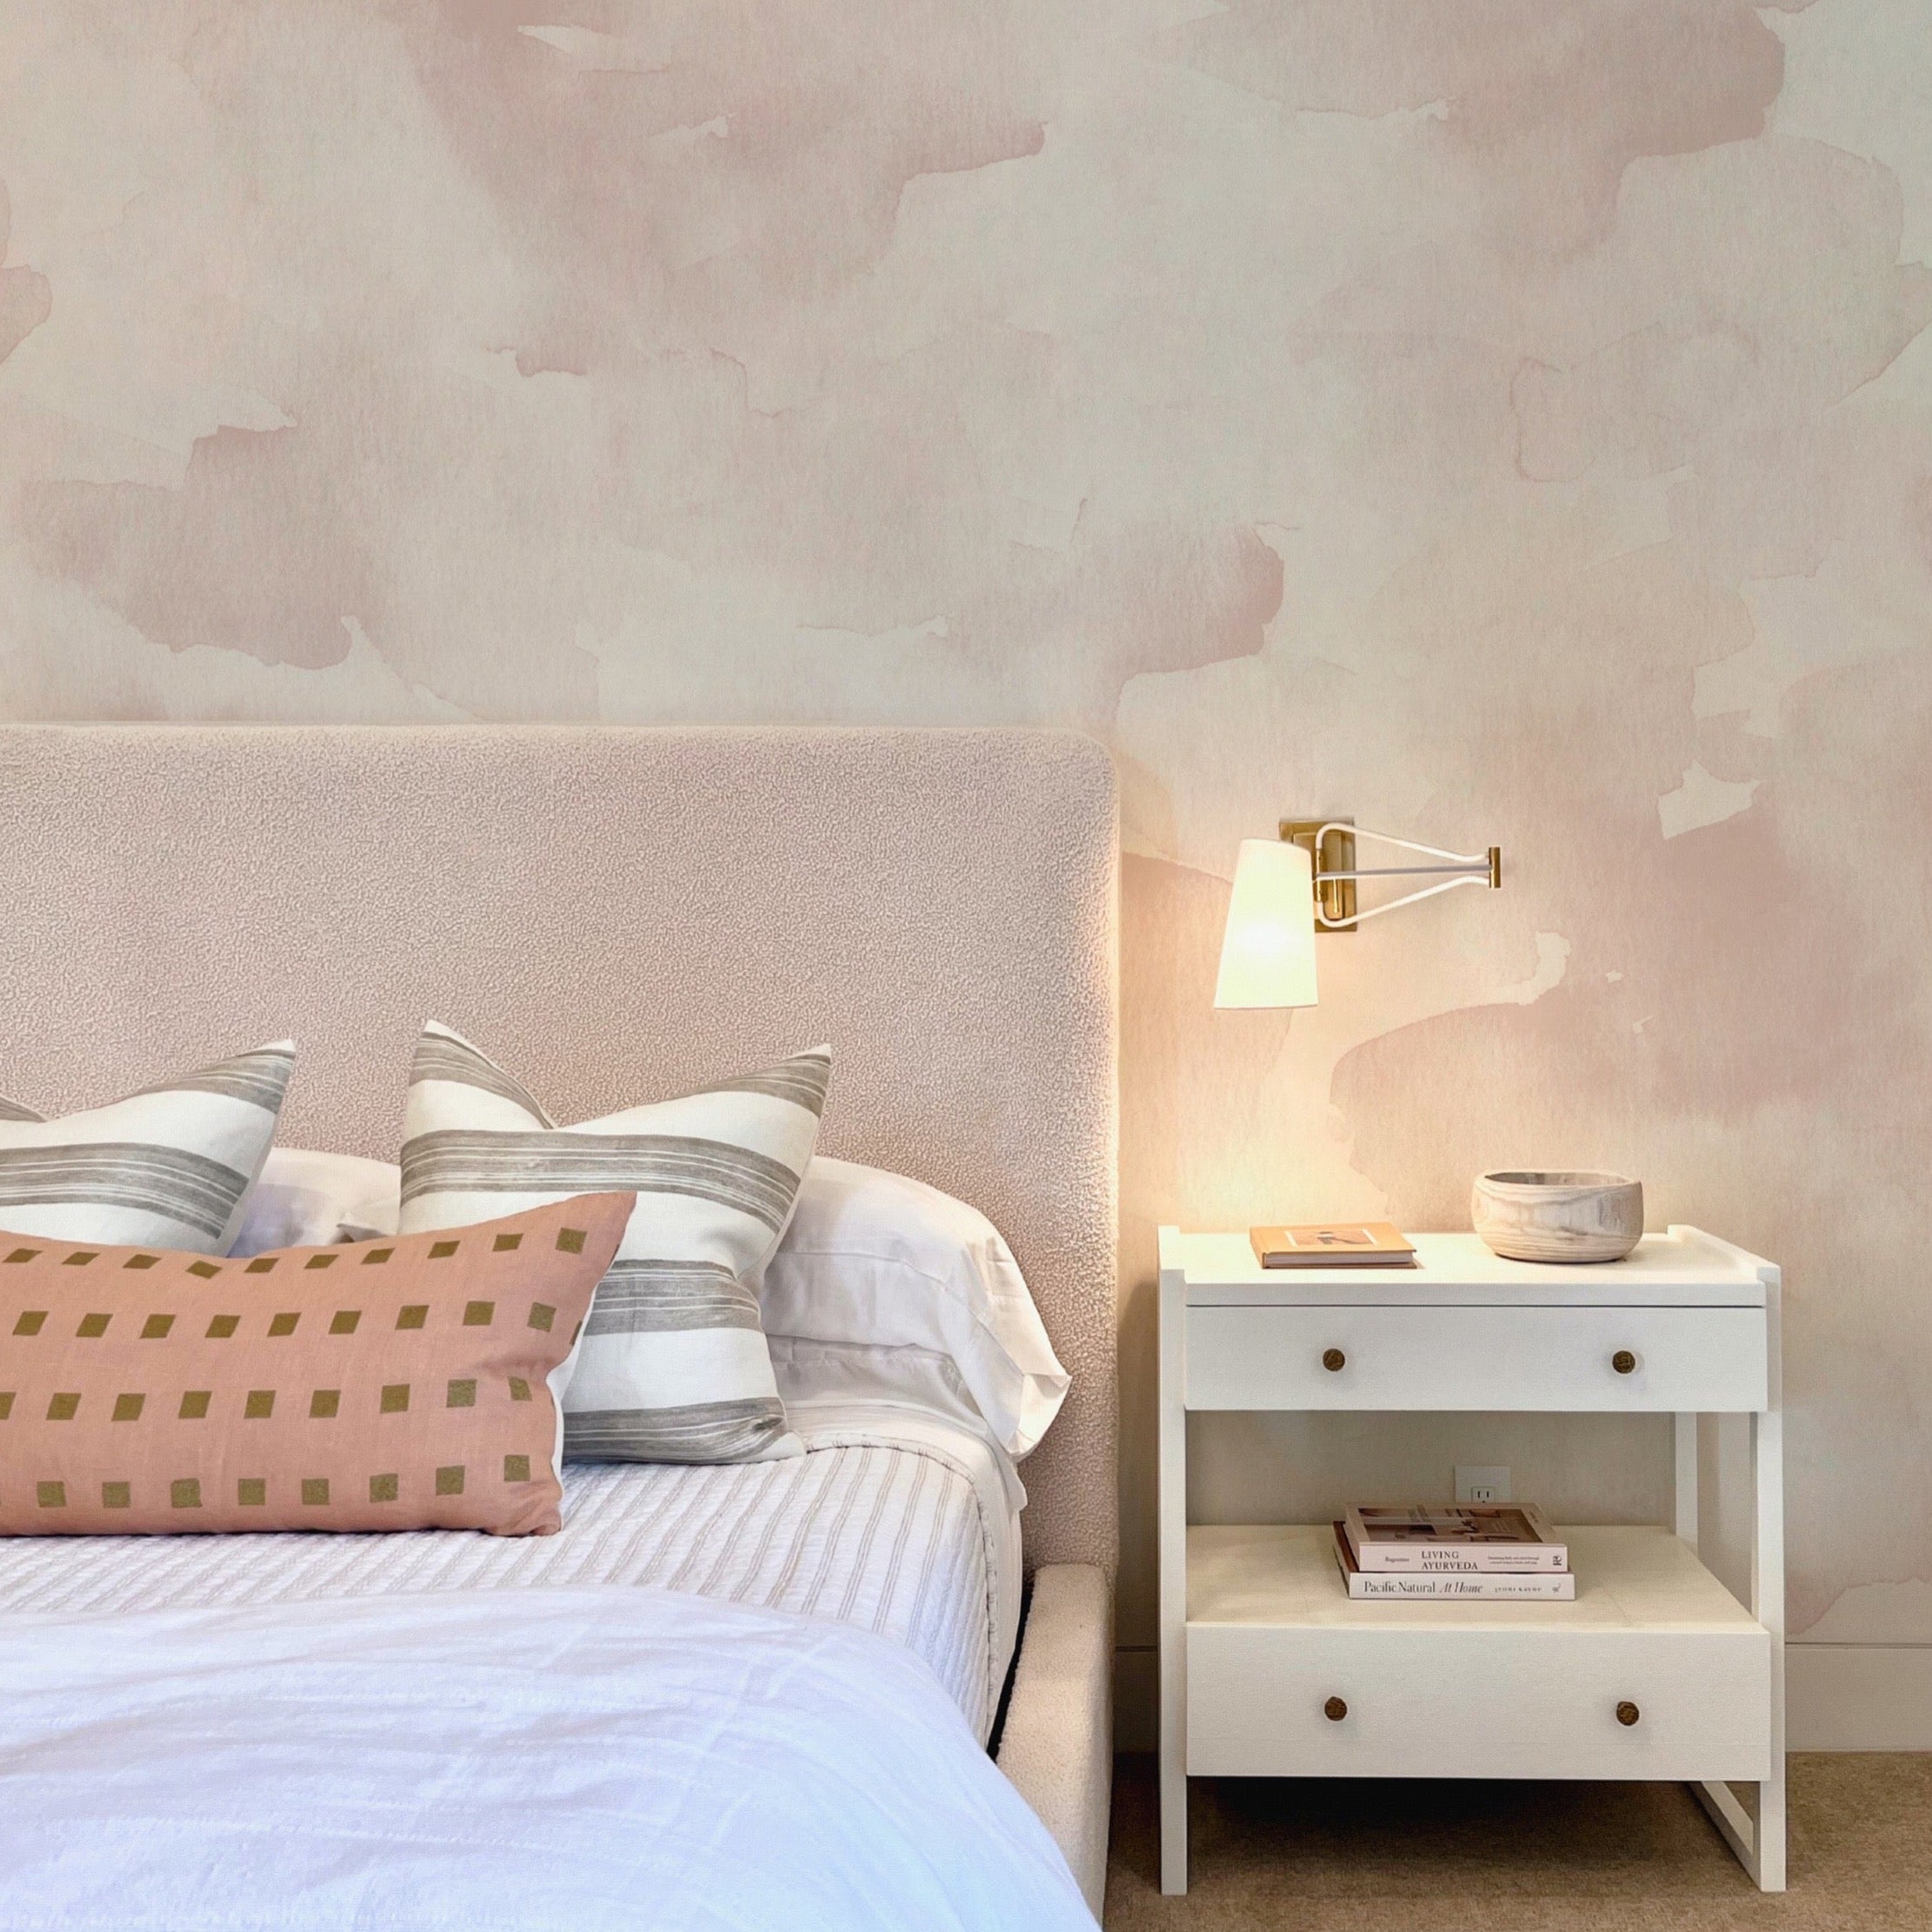 Elegant bedroom interior with Watercolor Mural Wallpaper - Nude Pink, highlighting its soft blush watercolor patterns behind a beige upholstered headboard and a chic bedside table with a modern lamp.